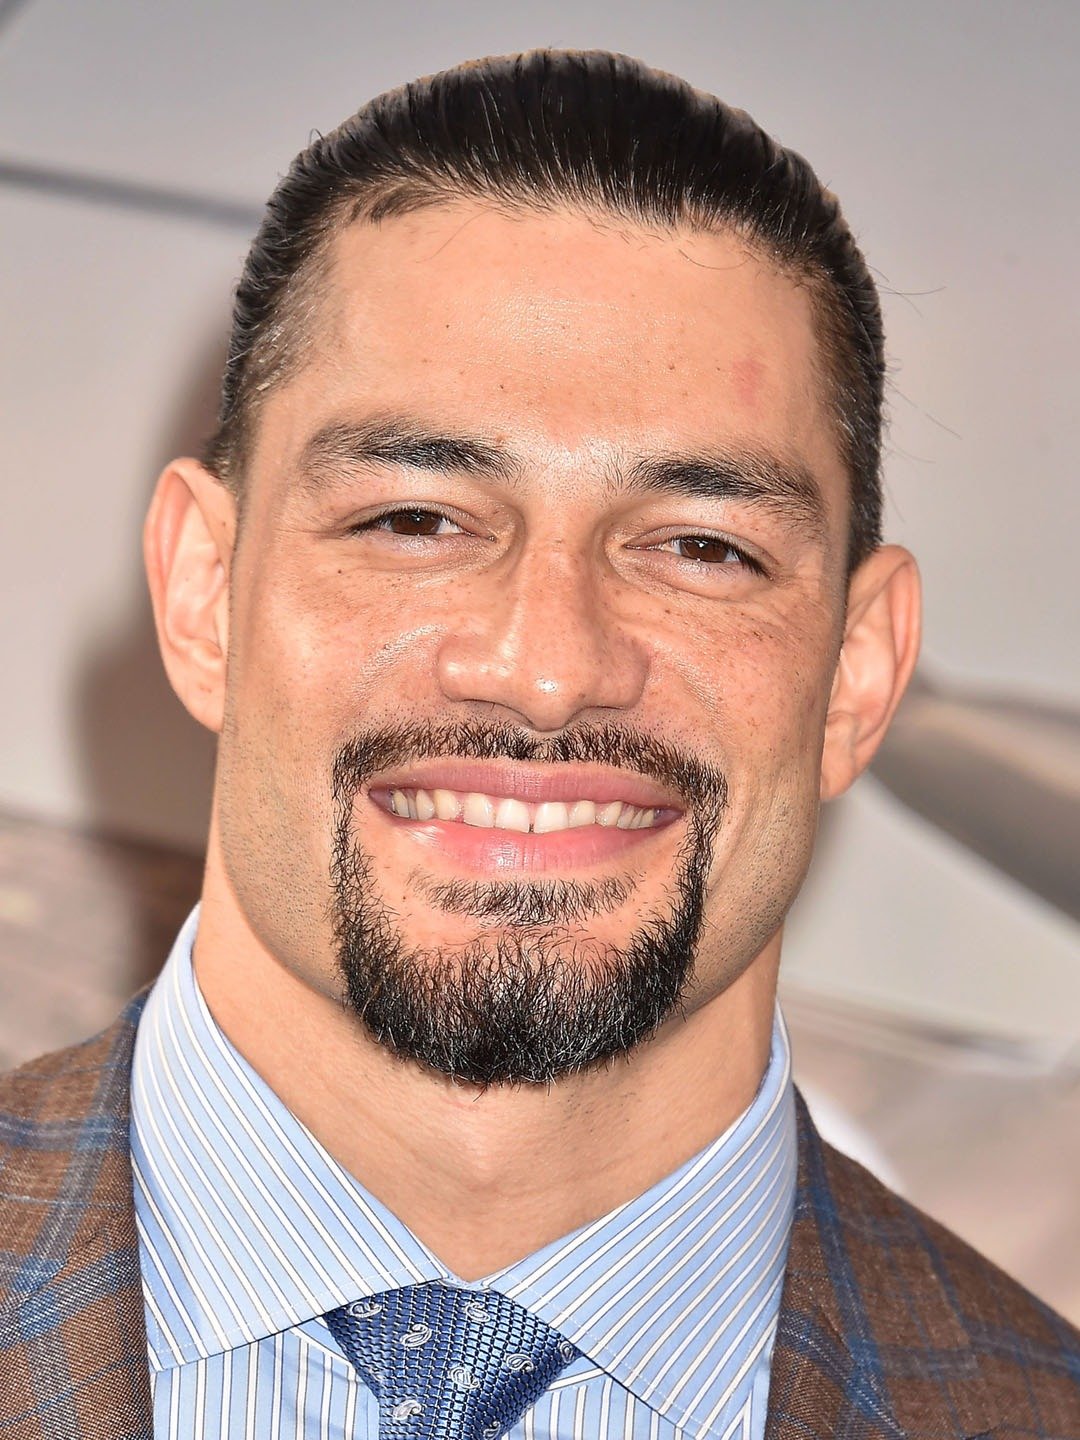 Pin by Stephanie Greholver on Roman Reigns  Roman reigns wwe champion Wwe  roman reigns Wwe superstar roman reigns